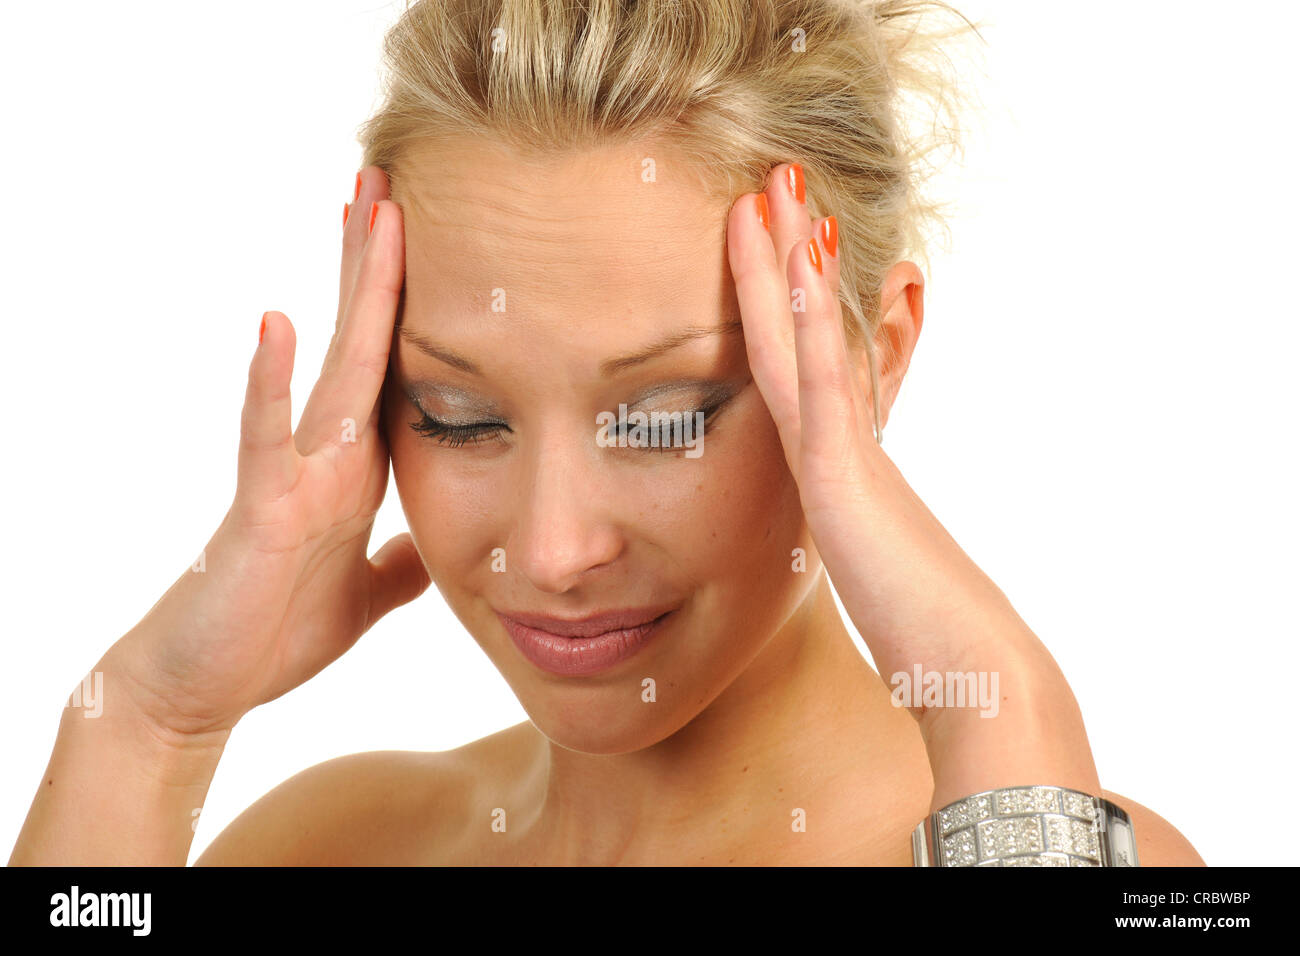 Young woman, unable to cope, stressed out, irritated, headache, portrait Stock Photo